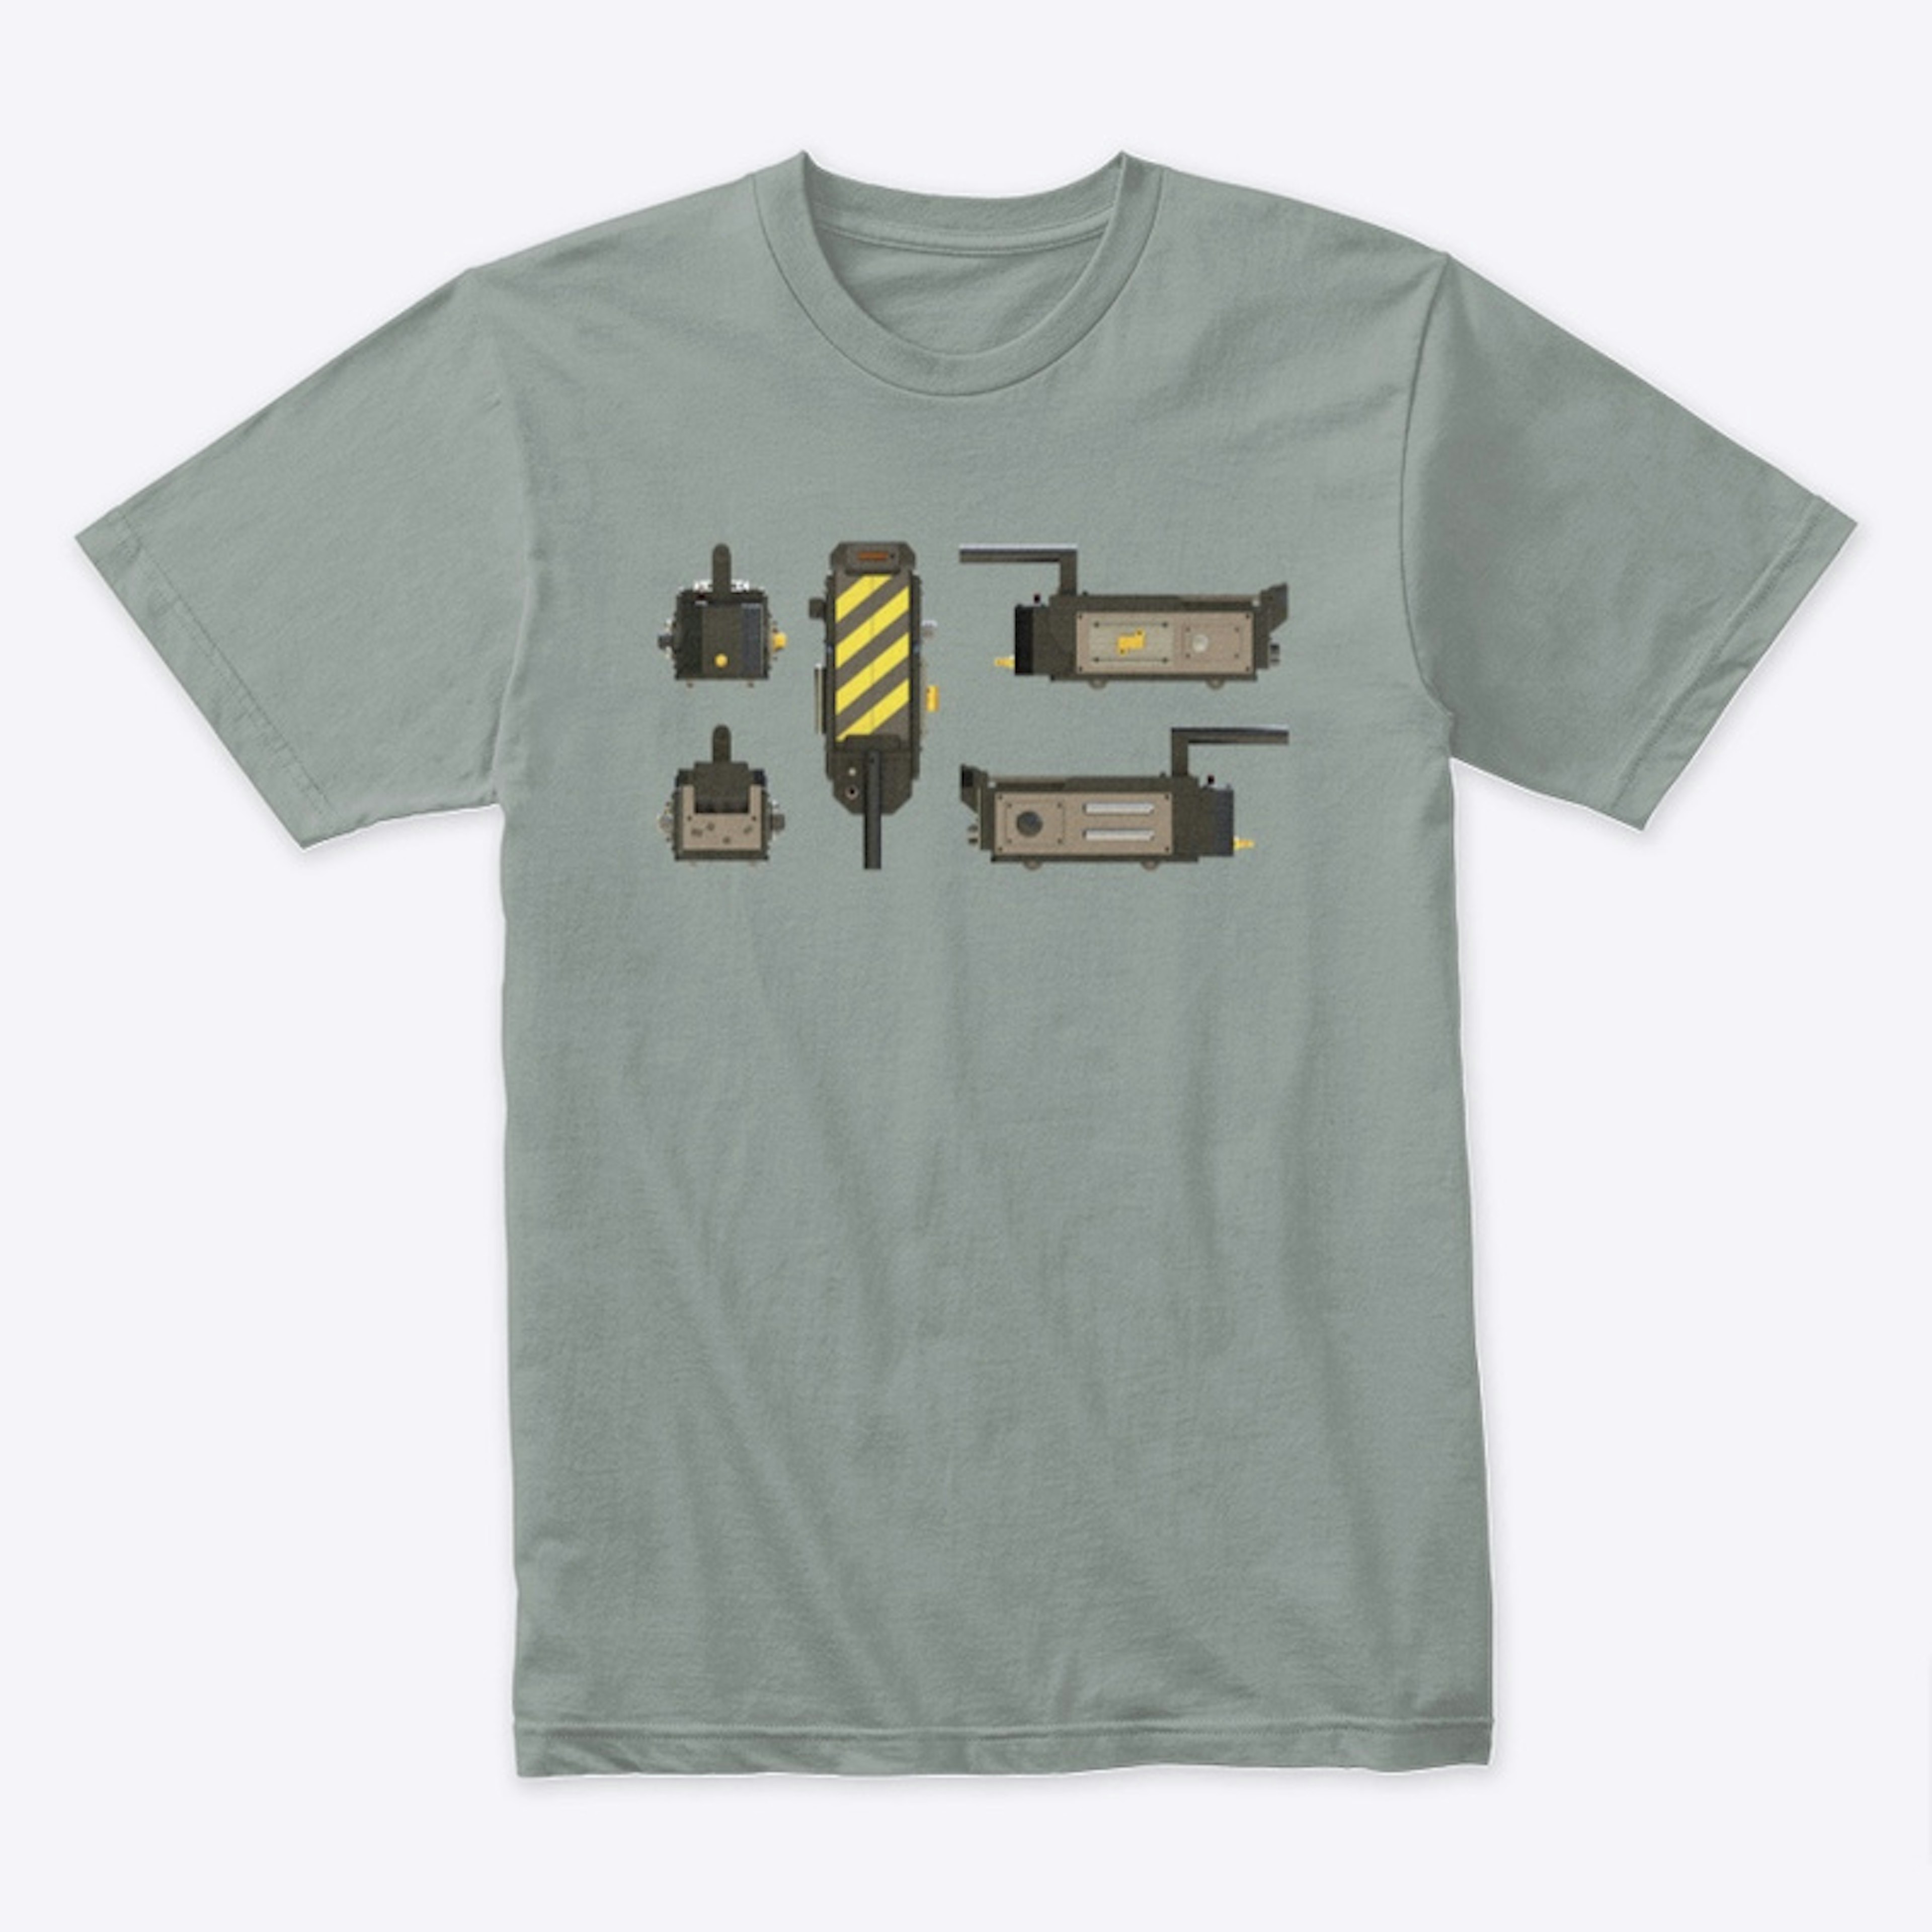 Ghostbusters Ghost Trap Design T-shirt